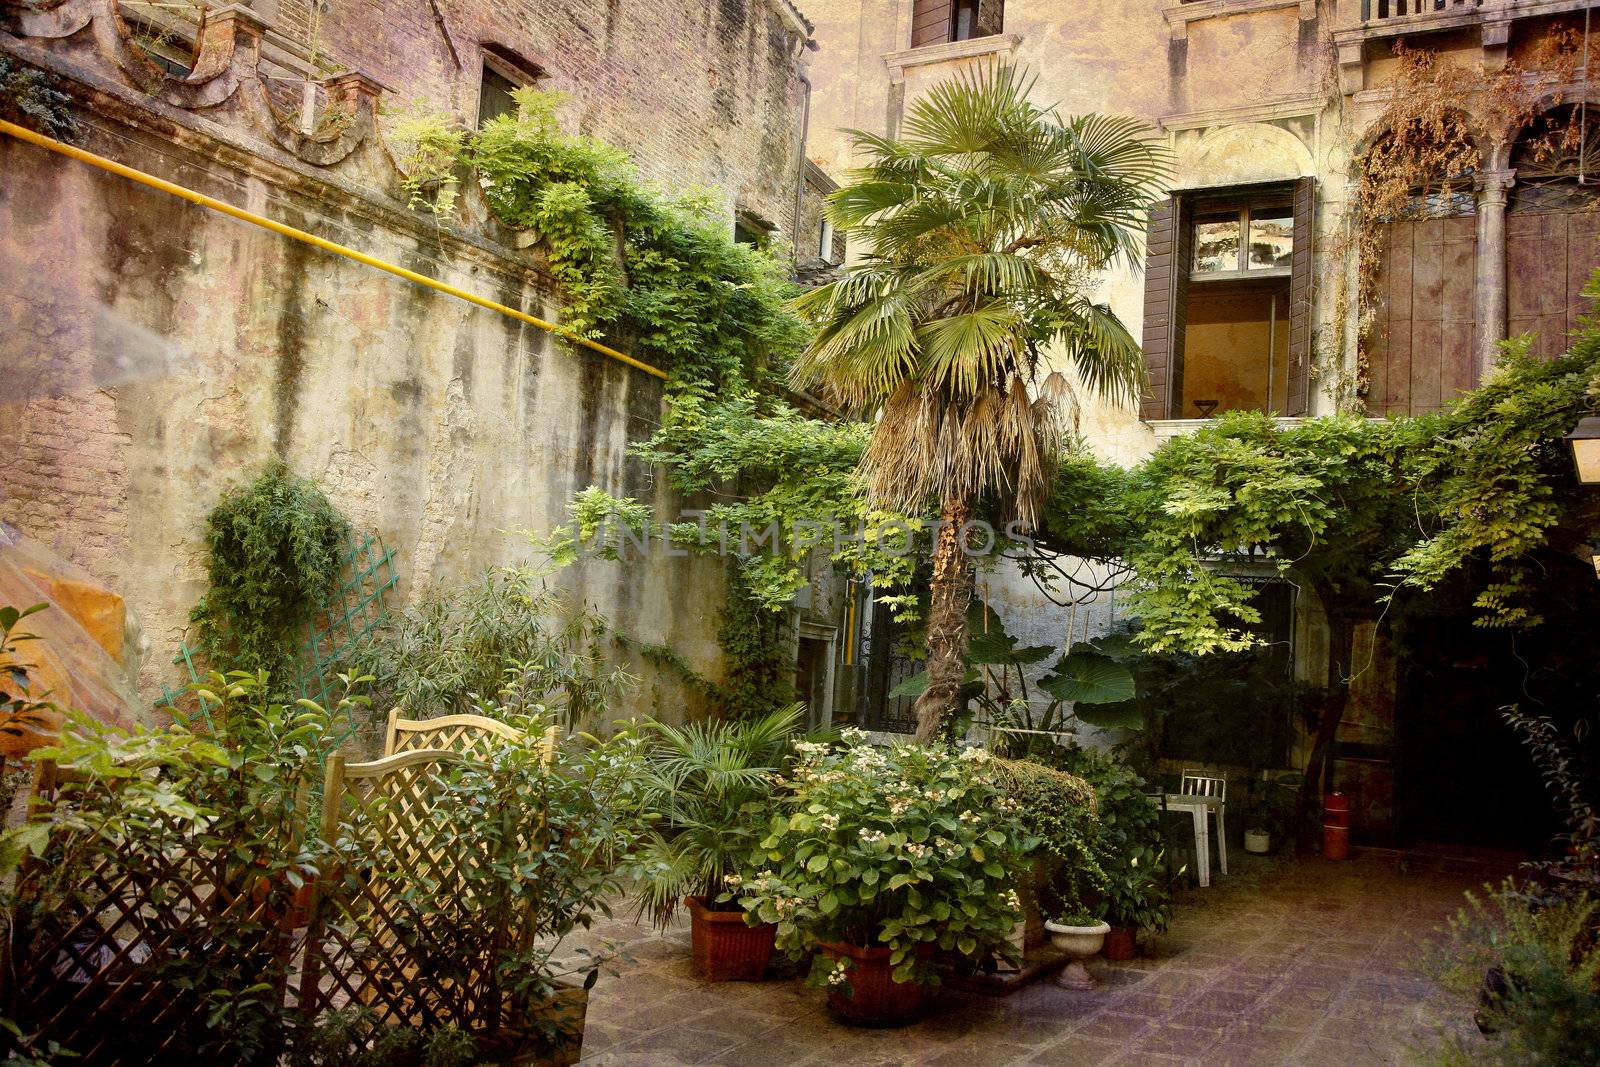 Artistic work of my own in retro style - Postcard from Italy. - Patio,  Venice.